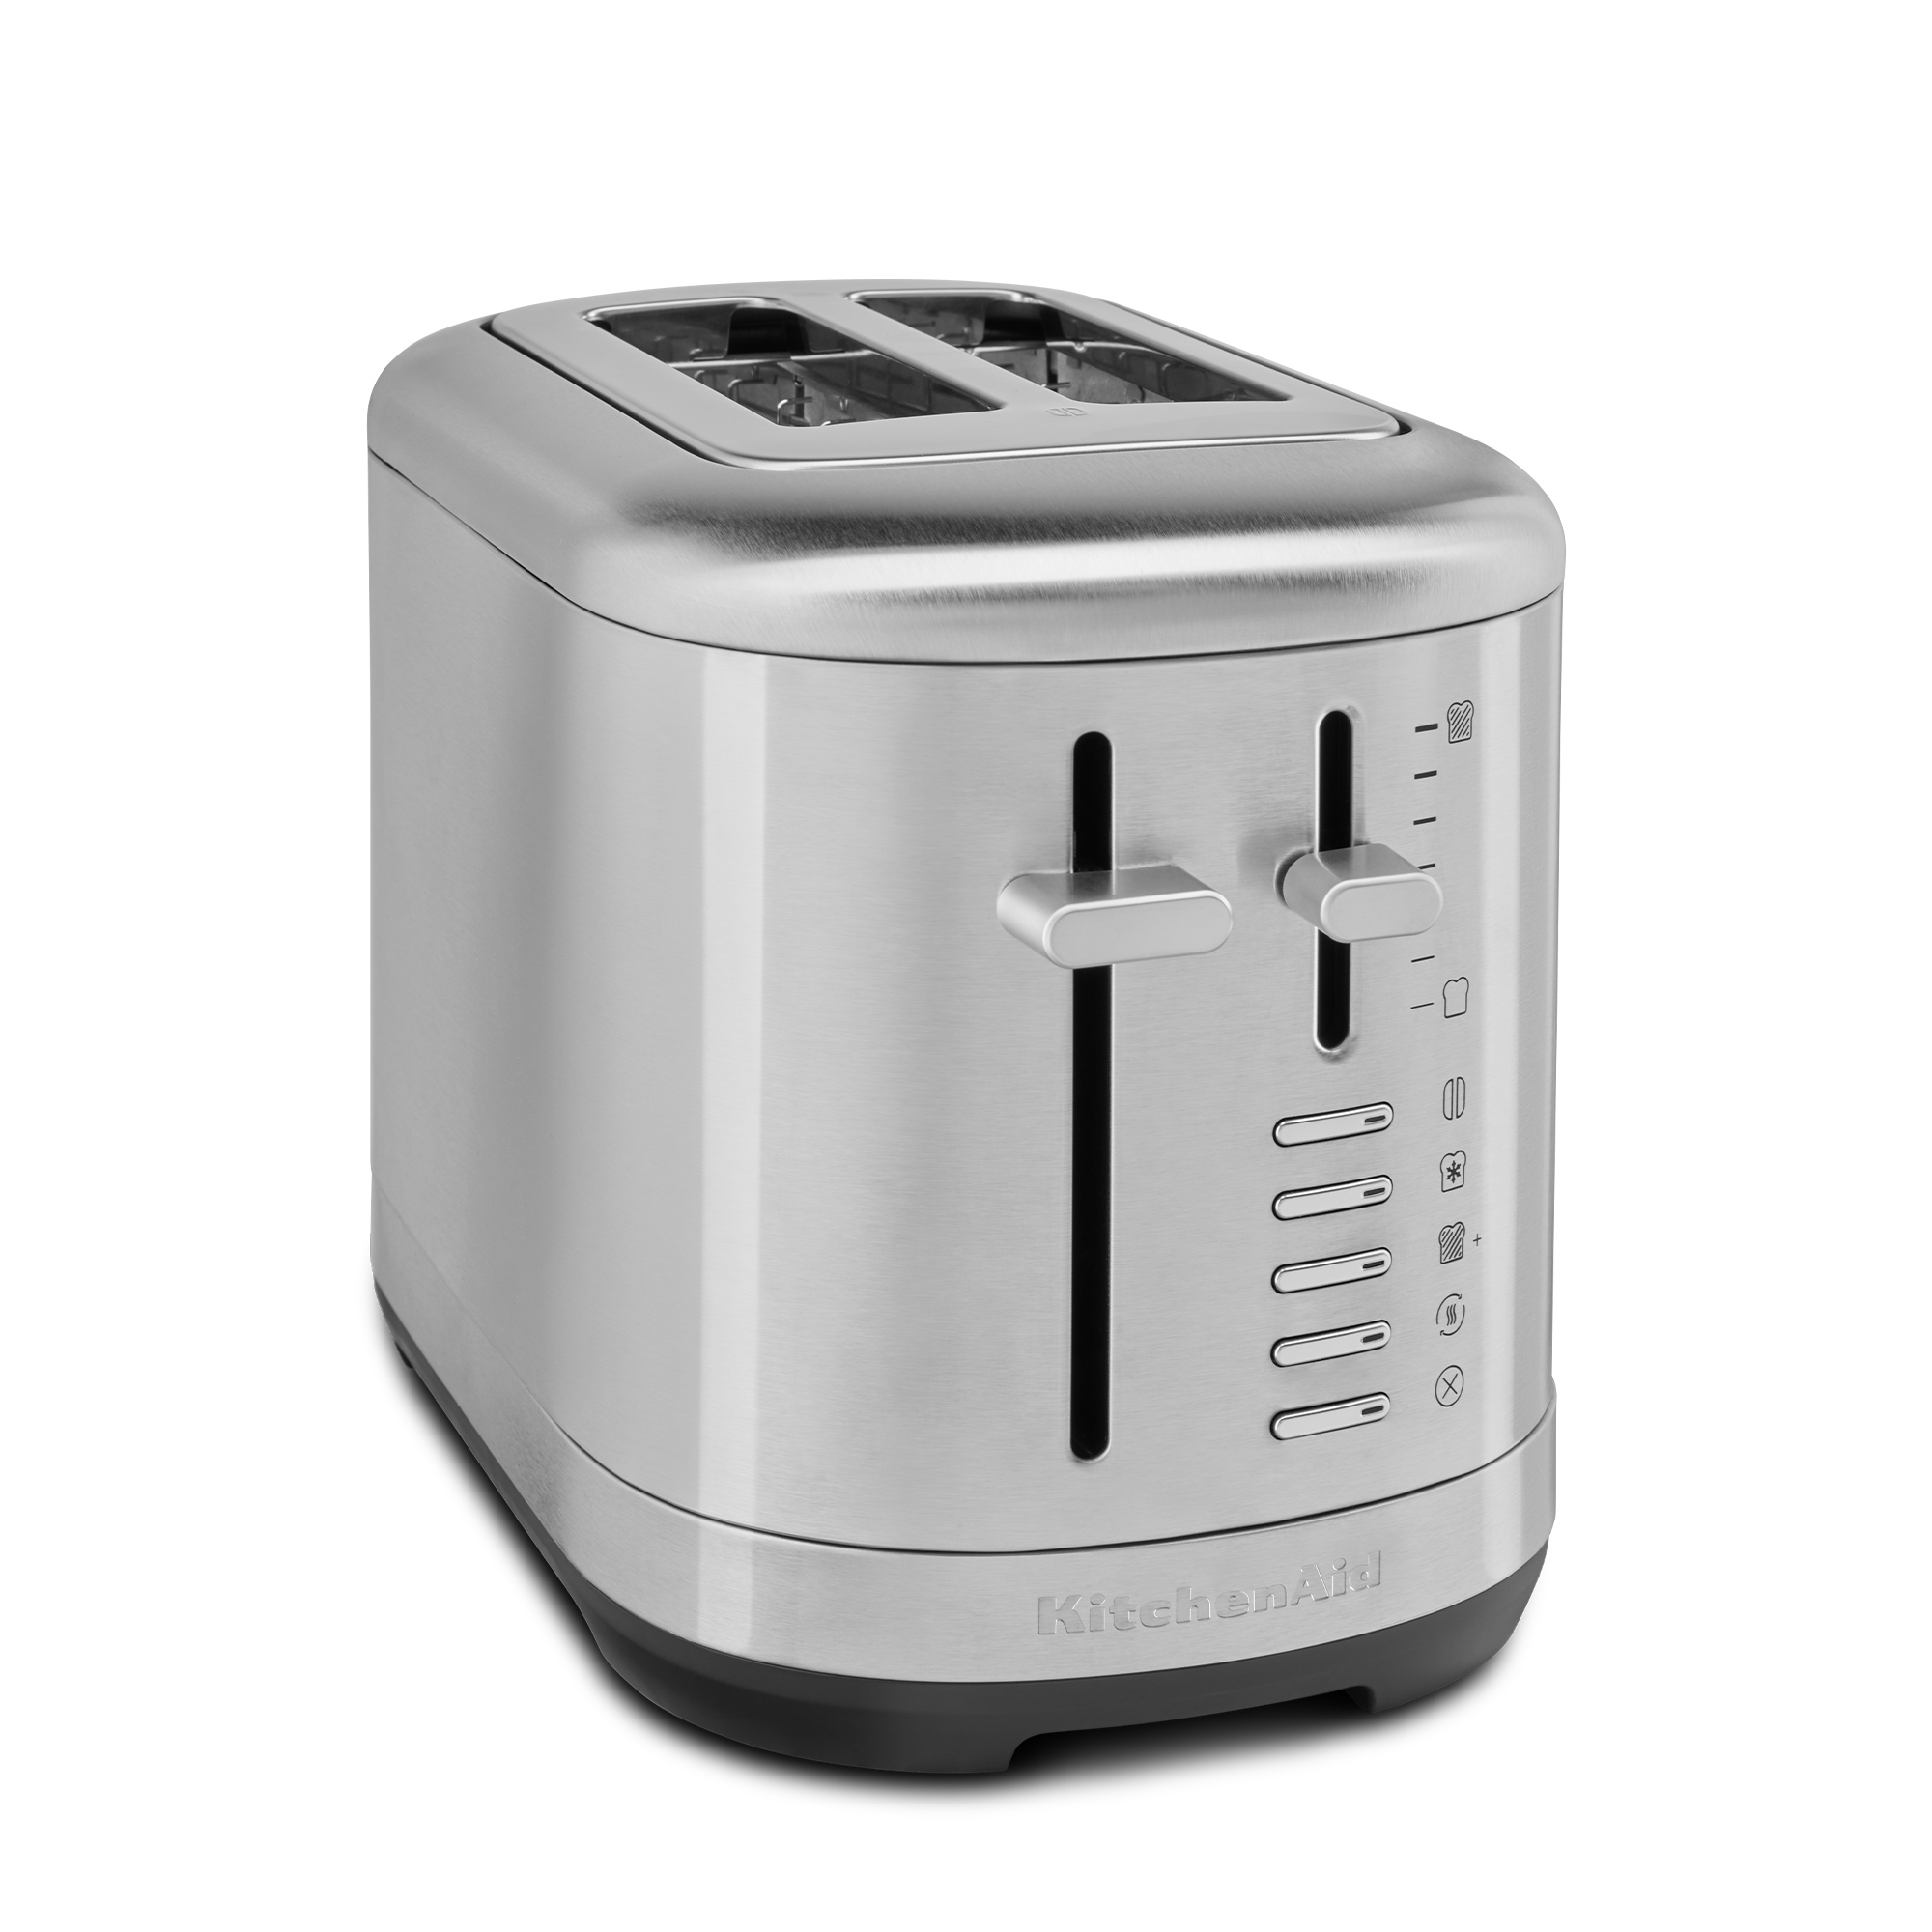 KitchenAid - Toaster with manual operation for 2 slices - Stainless Steel